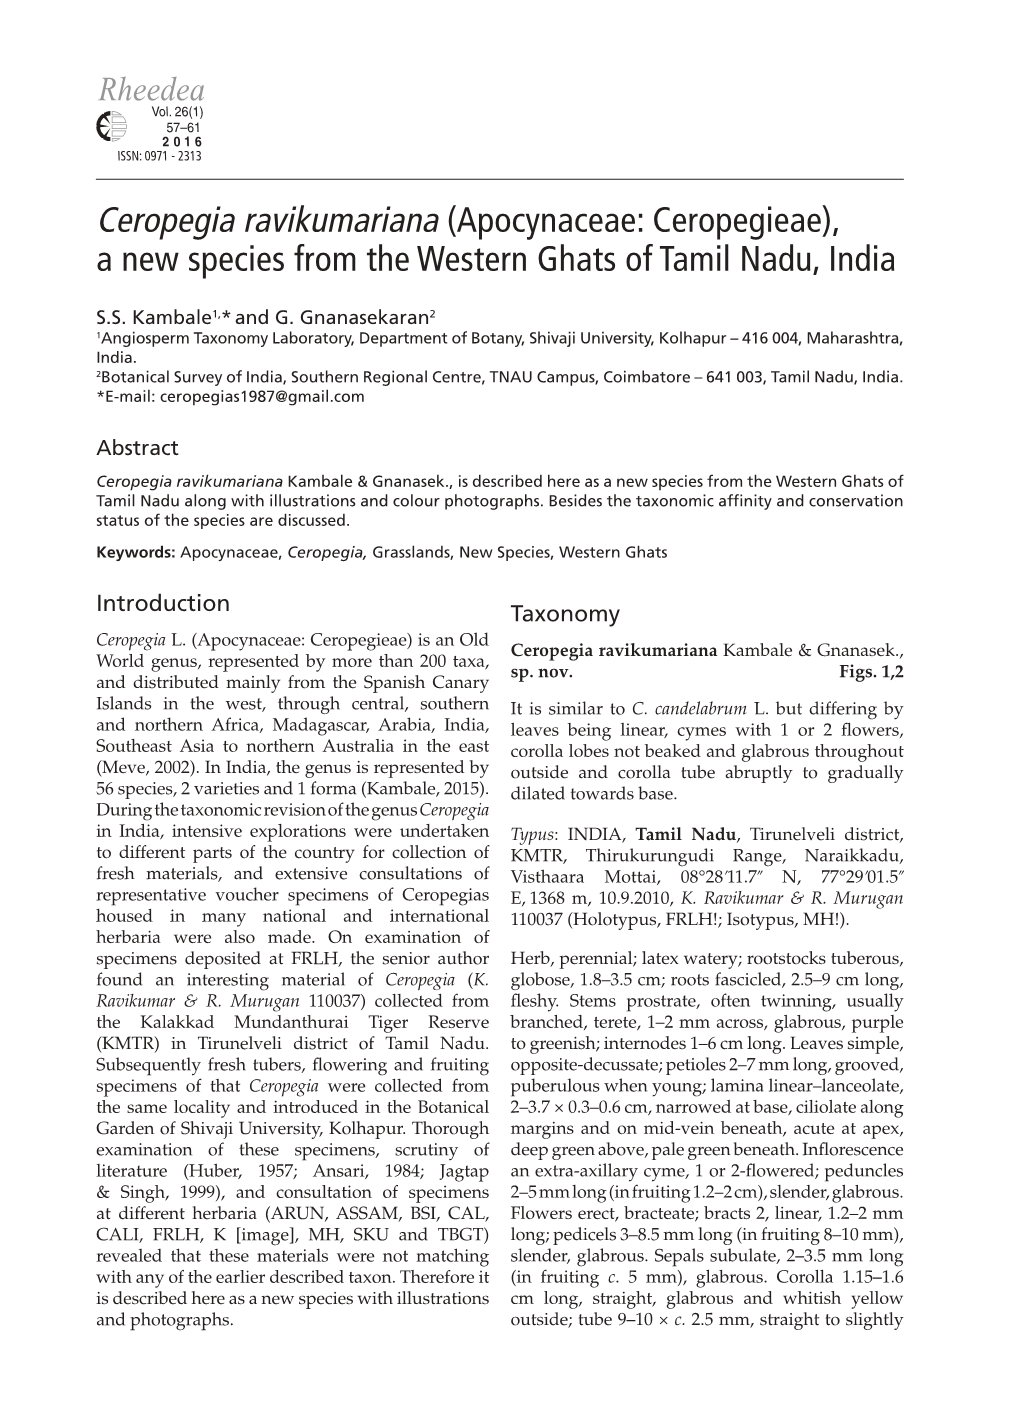 Ceropegia Ravikumariana (Apocynaceae: Ceropegieae), a New Species from the Western Ghats of Tamil Nadu, India